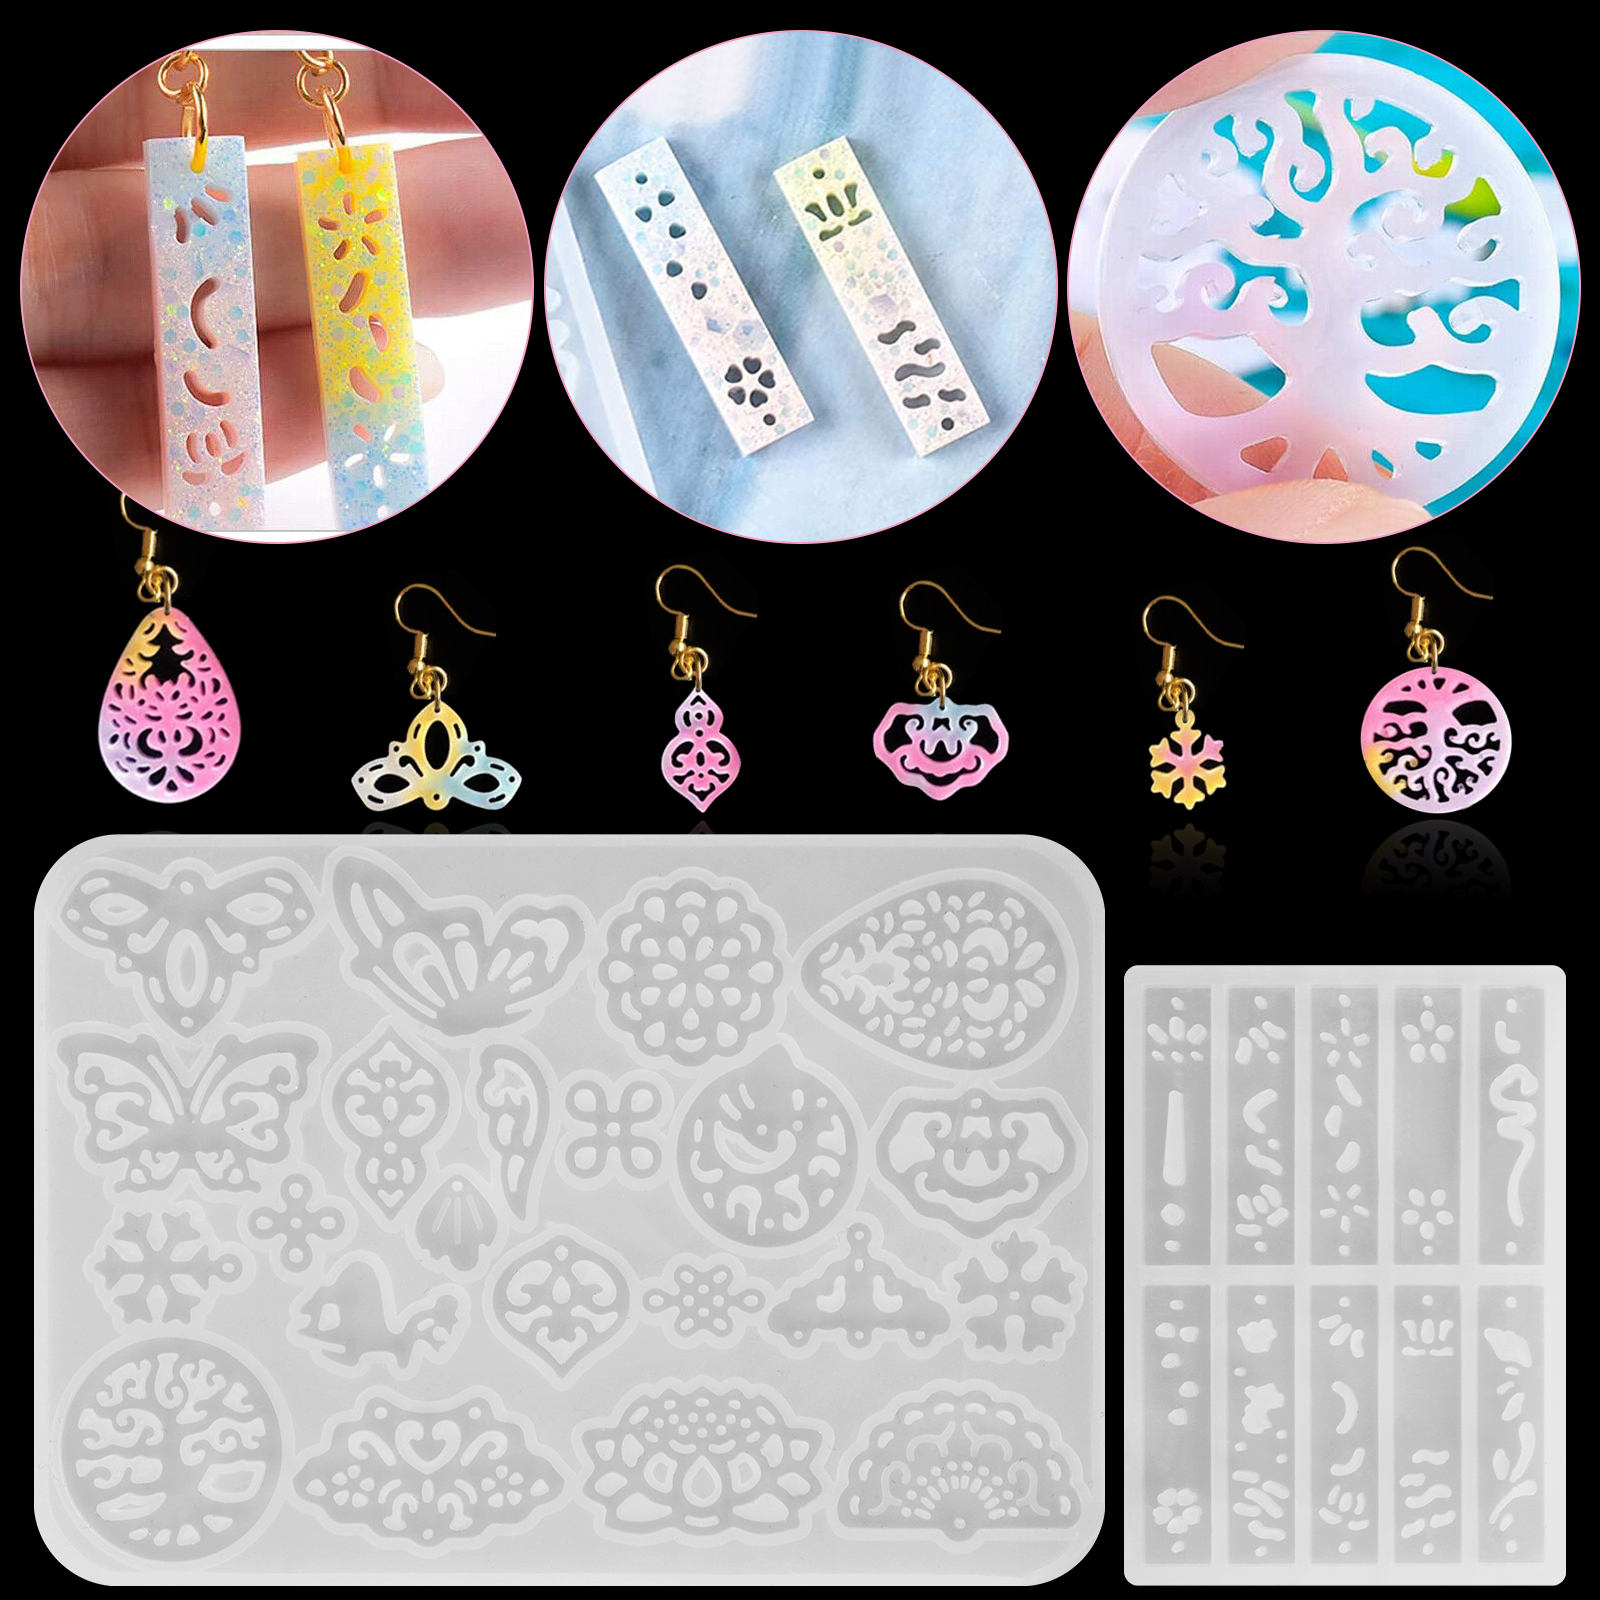 EMTFTOI 6pcs Resin Earring Mold and 1Pcs Resin Pet Tag Mold,DIY Jewelry Resin Casting Molds Set with 14pcs Decorative Accessories used for Earring